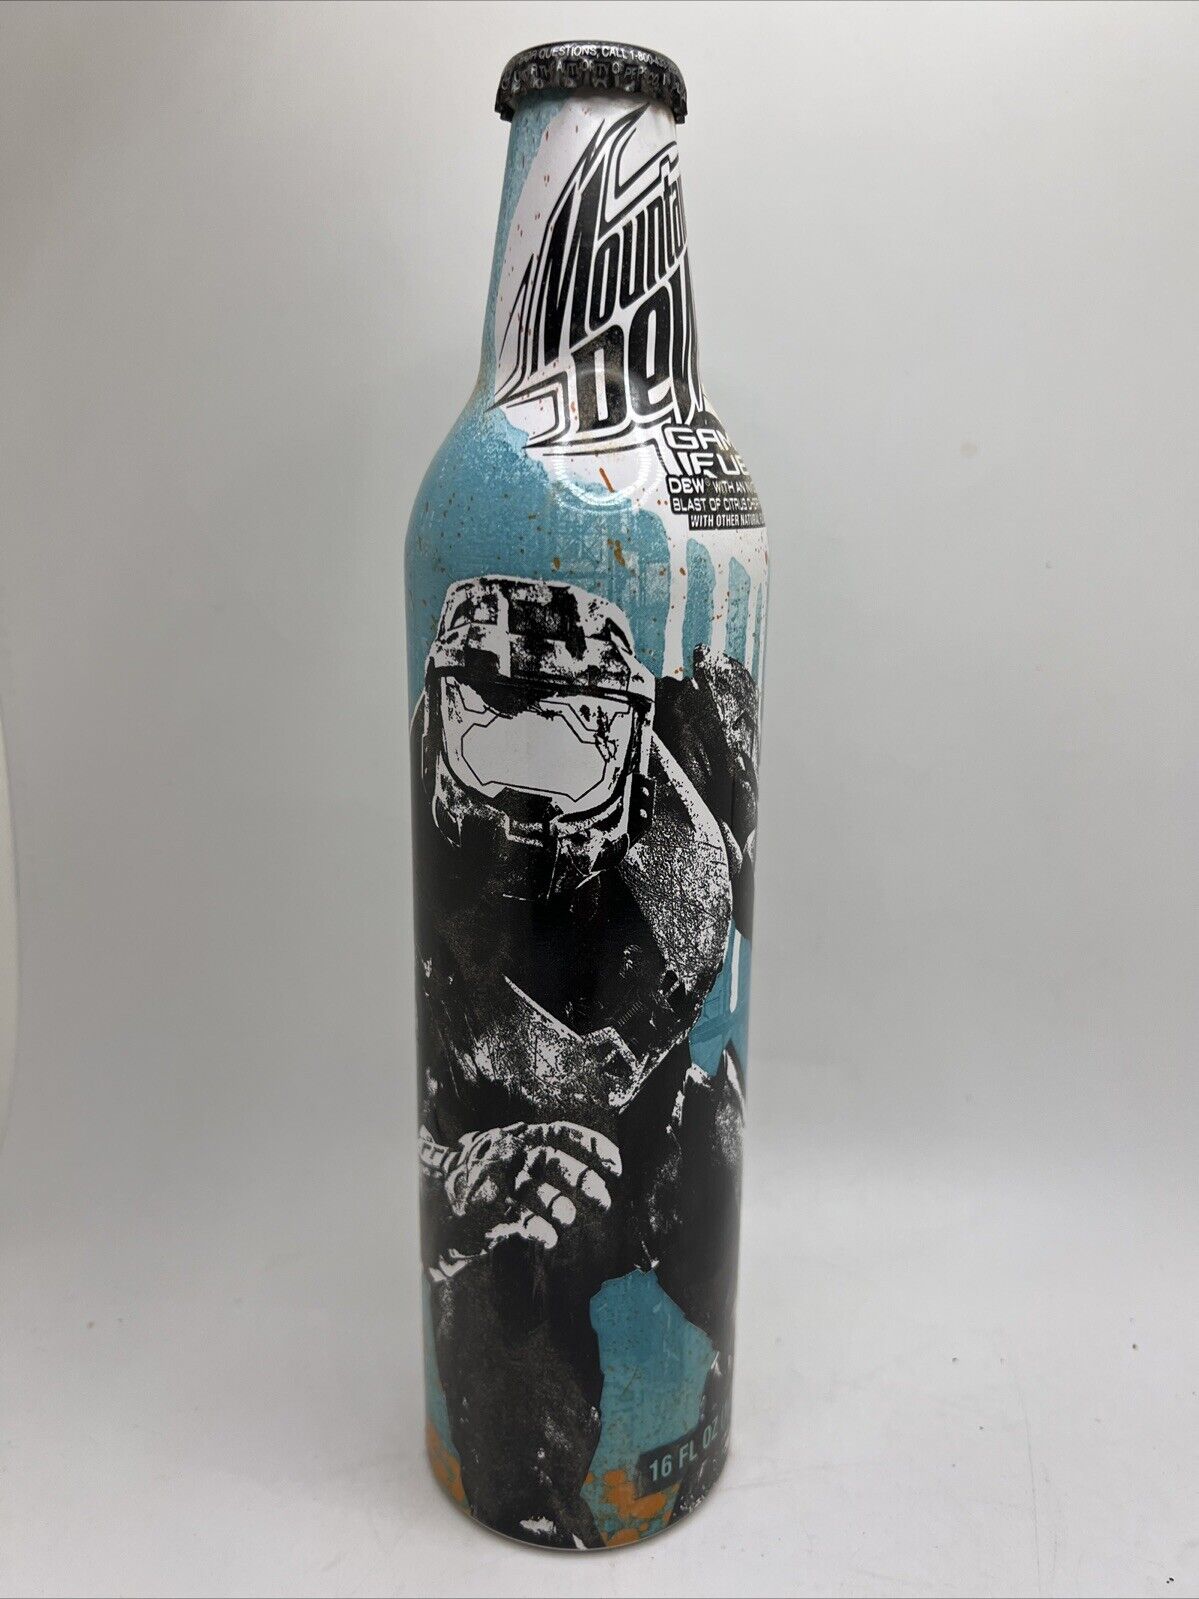 Halo 3 Master Chief Art Mountain Dew Label Game Fuel. Unopened. Bottle Exp